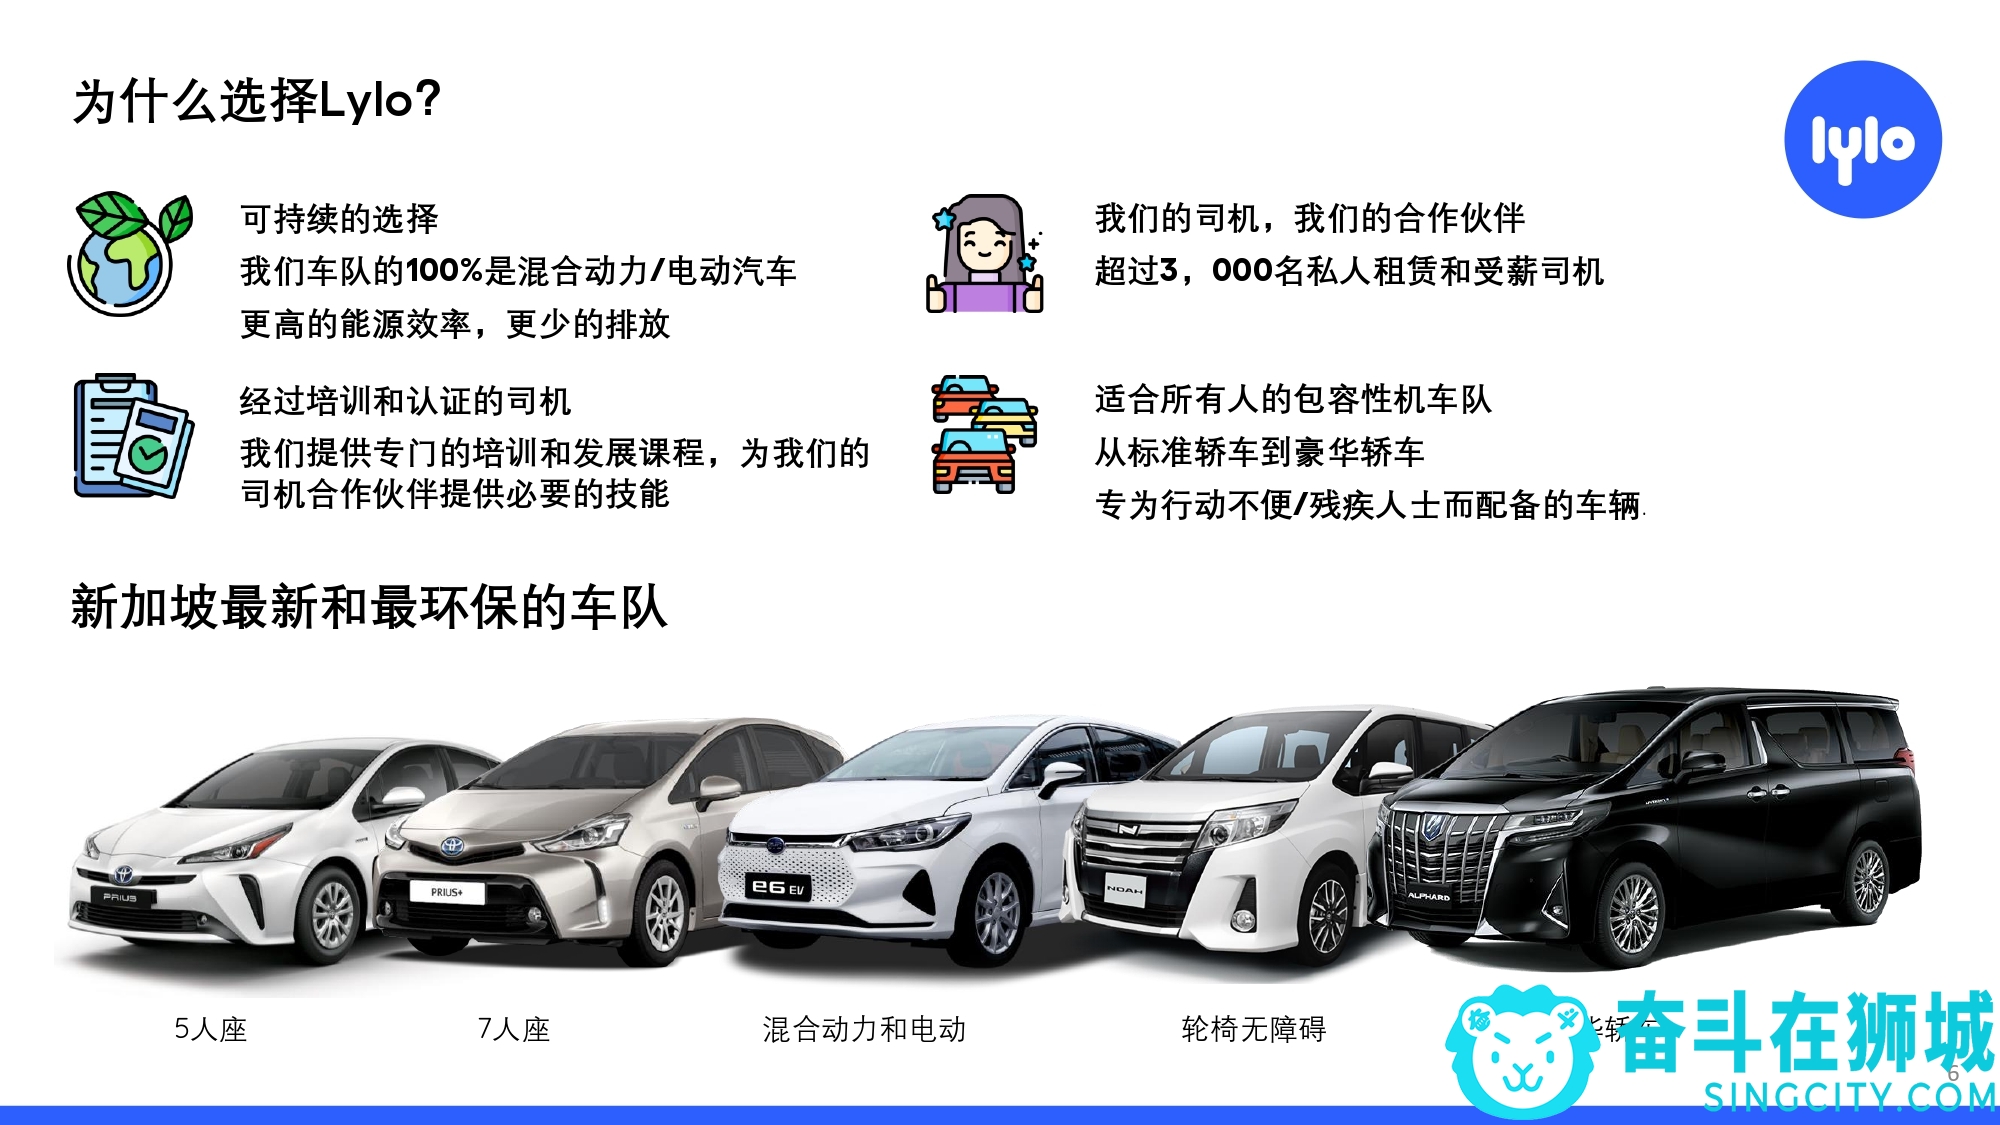 Lylo Introductory Deck v1.2 Chinese version_page-0006.jpg